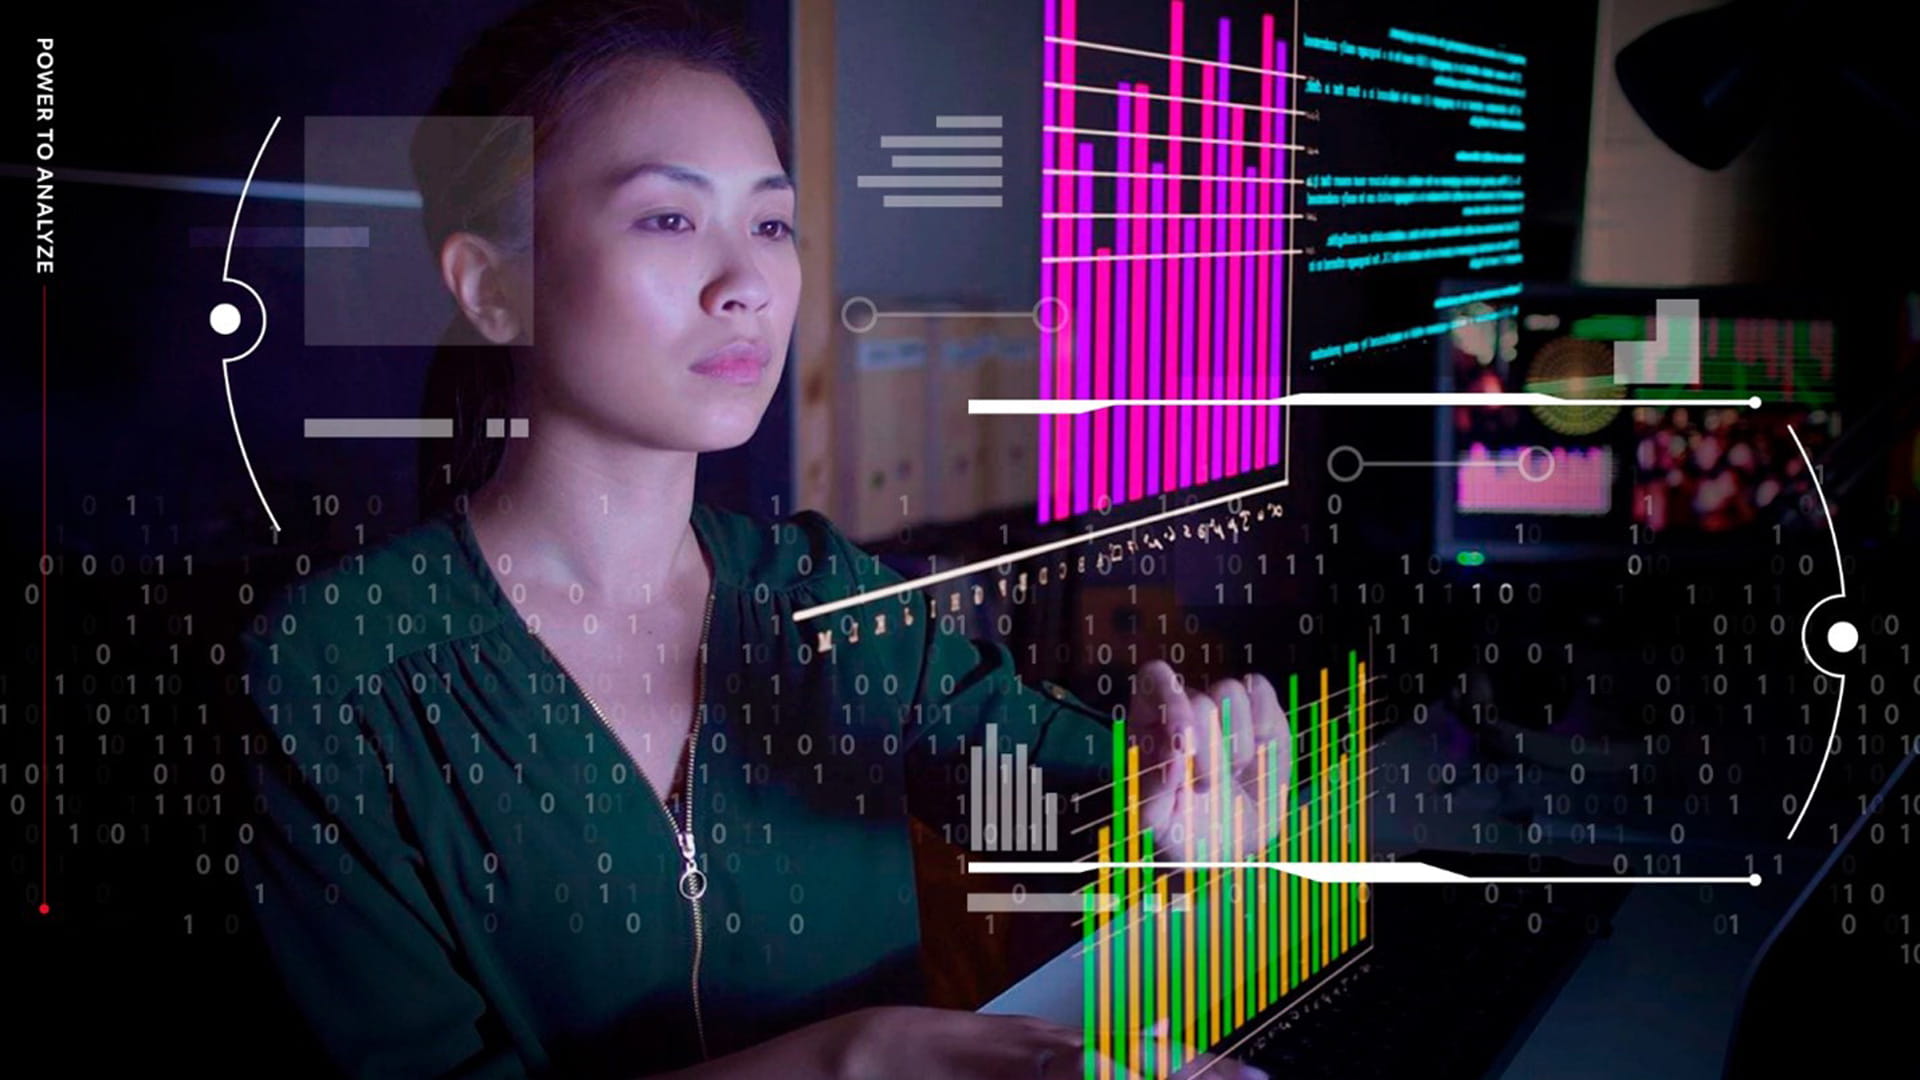 A woman views a virtual screen floating in front of her. The text 'Power to analyze' is overlaid.